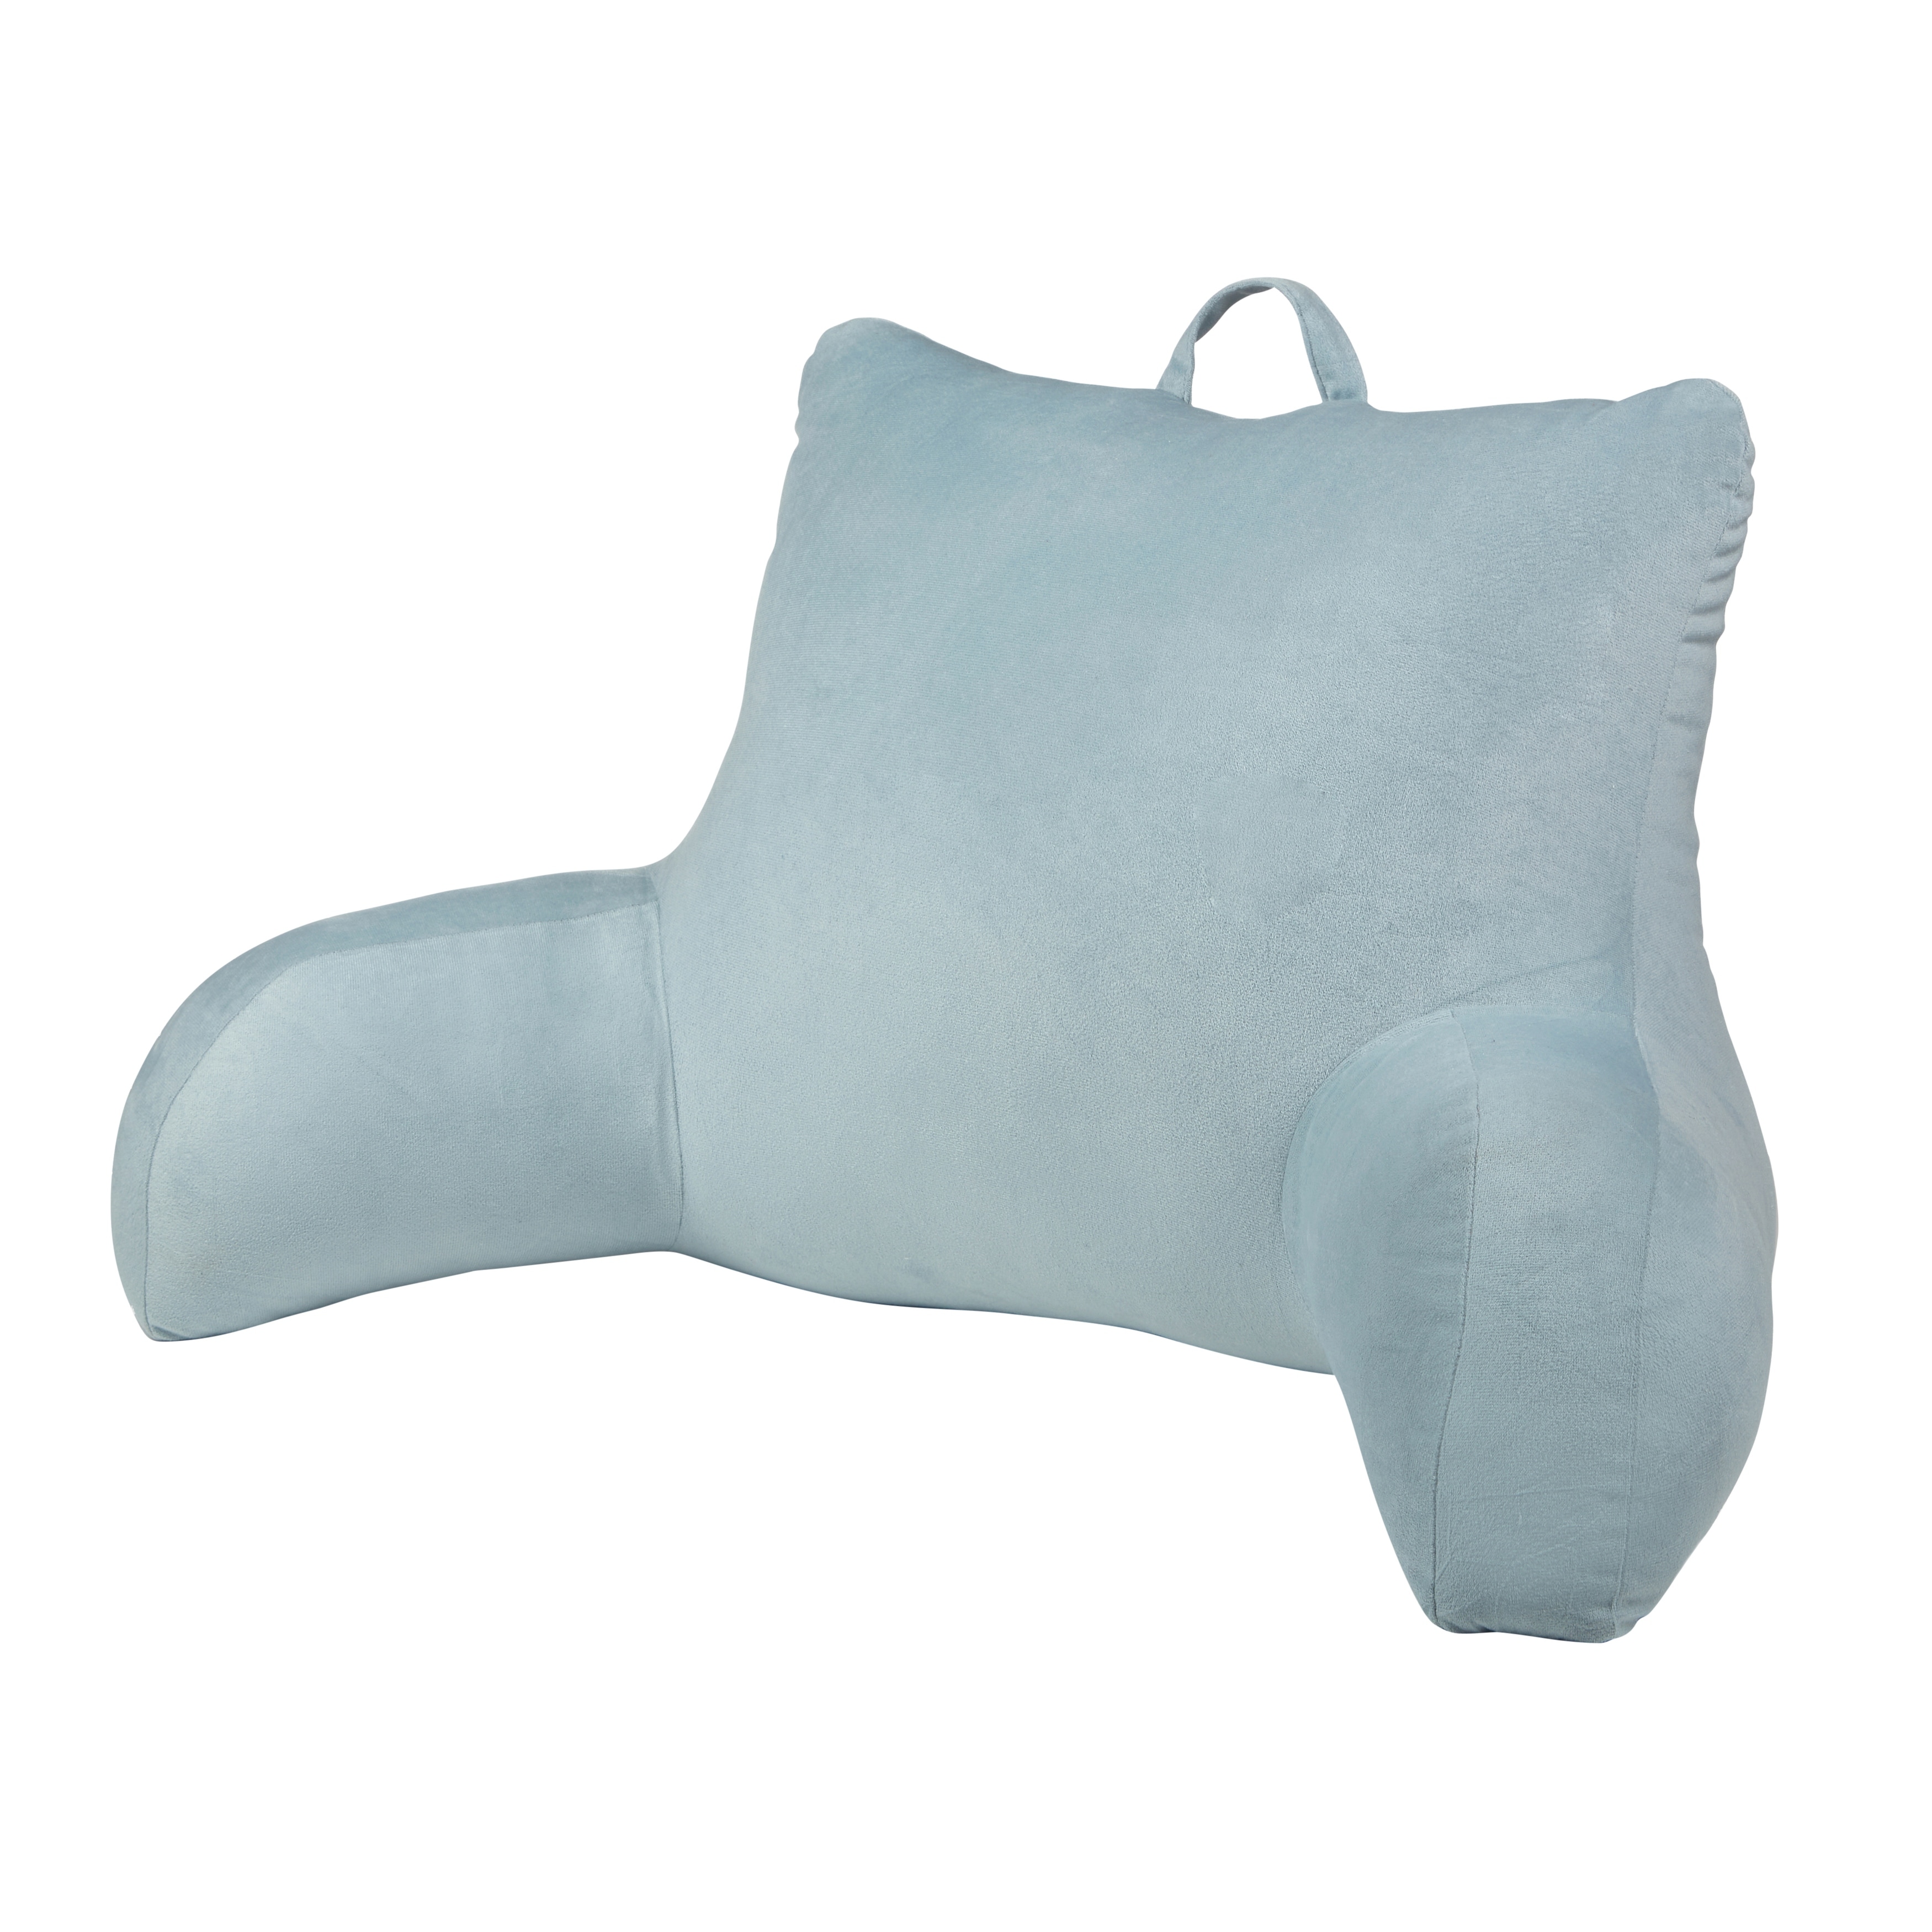 https://ak1.ostkcdn.com/images/products/is/images/direct/cb1d3b2bebe246c9bee6e7c4fa526a03076a2fc8/Klear-Vu-Velour-Bed-Rest-Back-Support-Pillow-with-Pocket-and-Handle.jpg